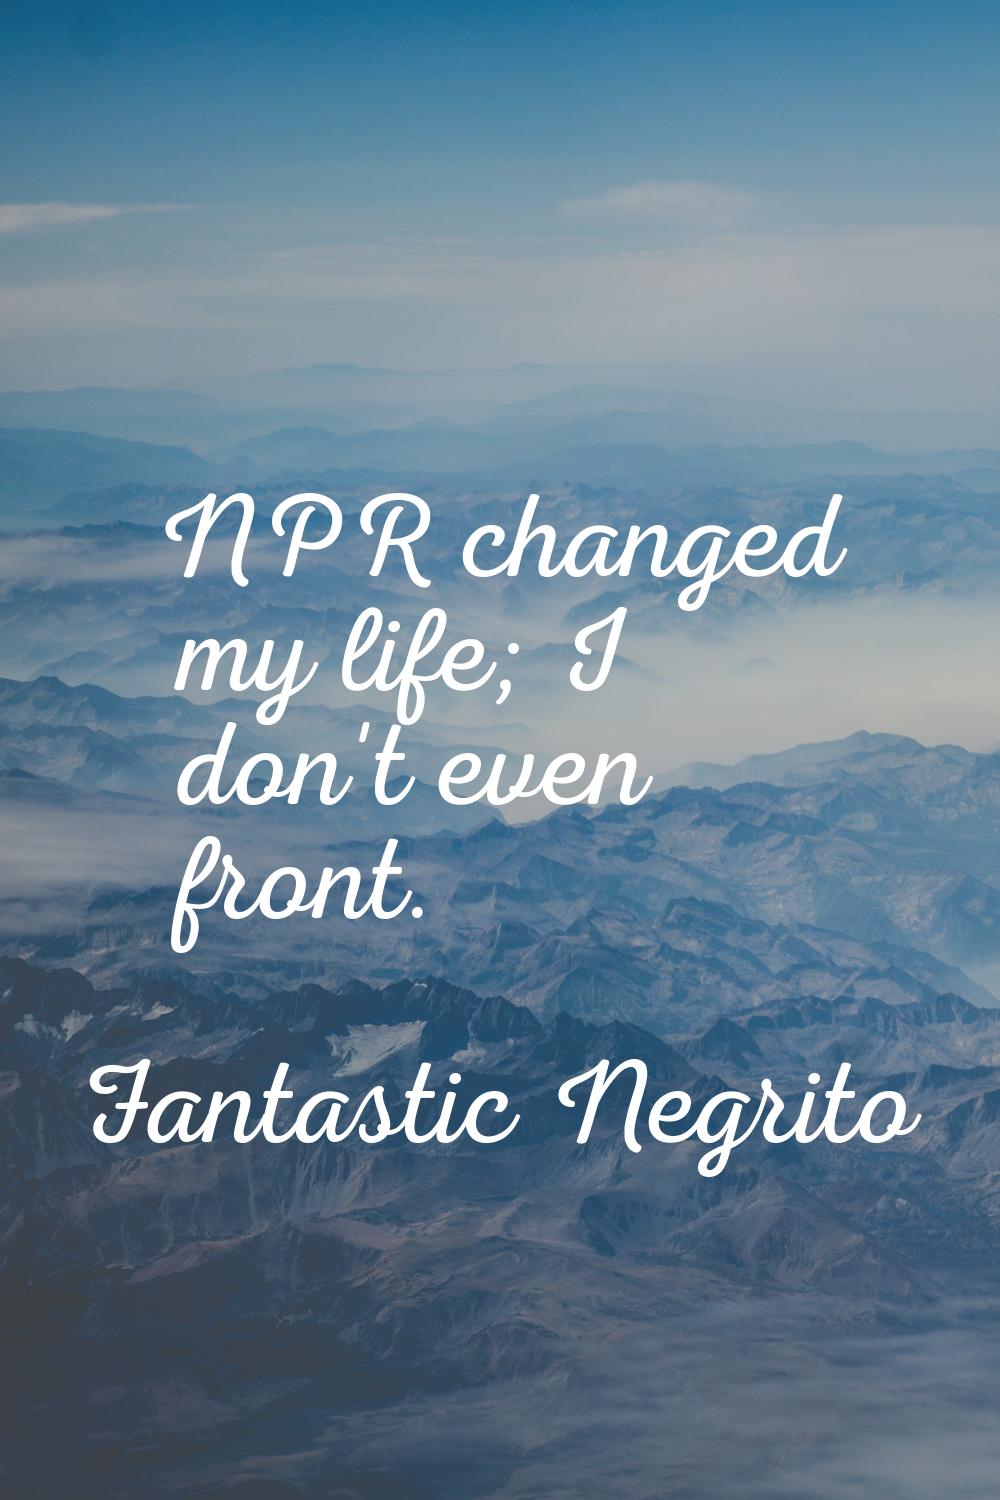 NPR changed my life; I don't even front.